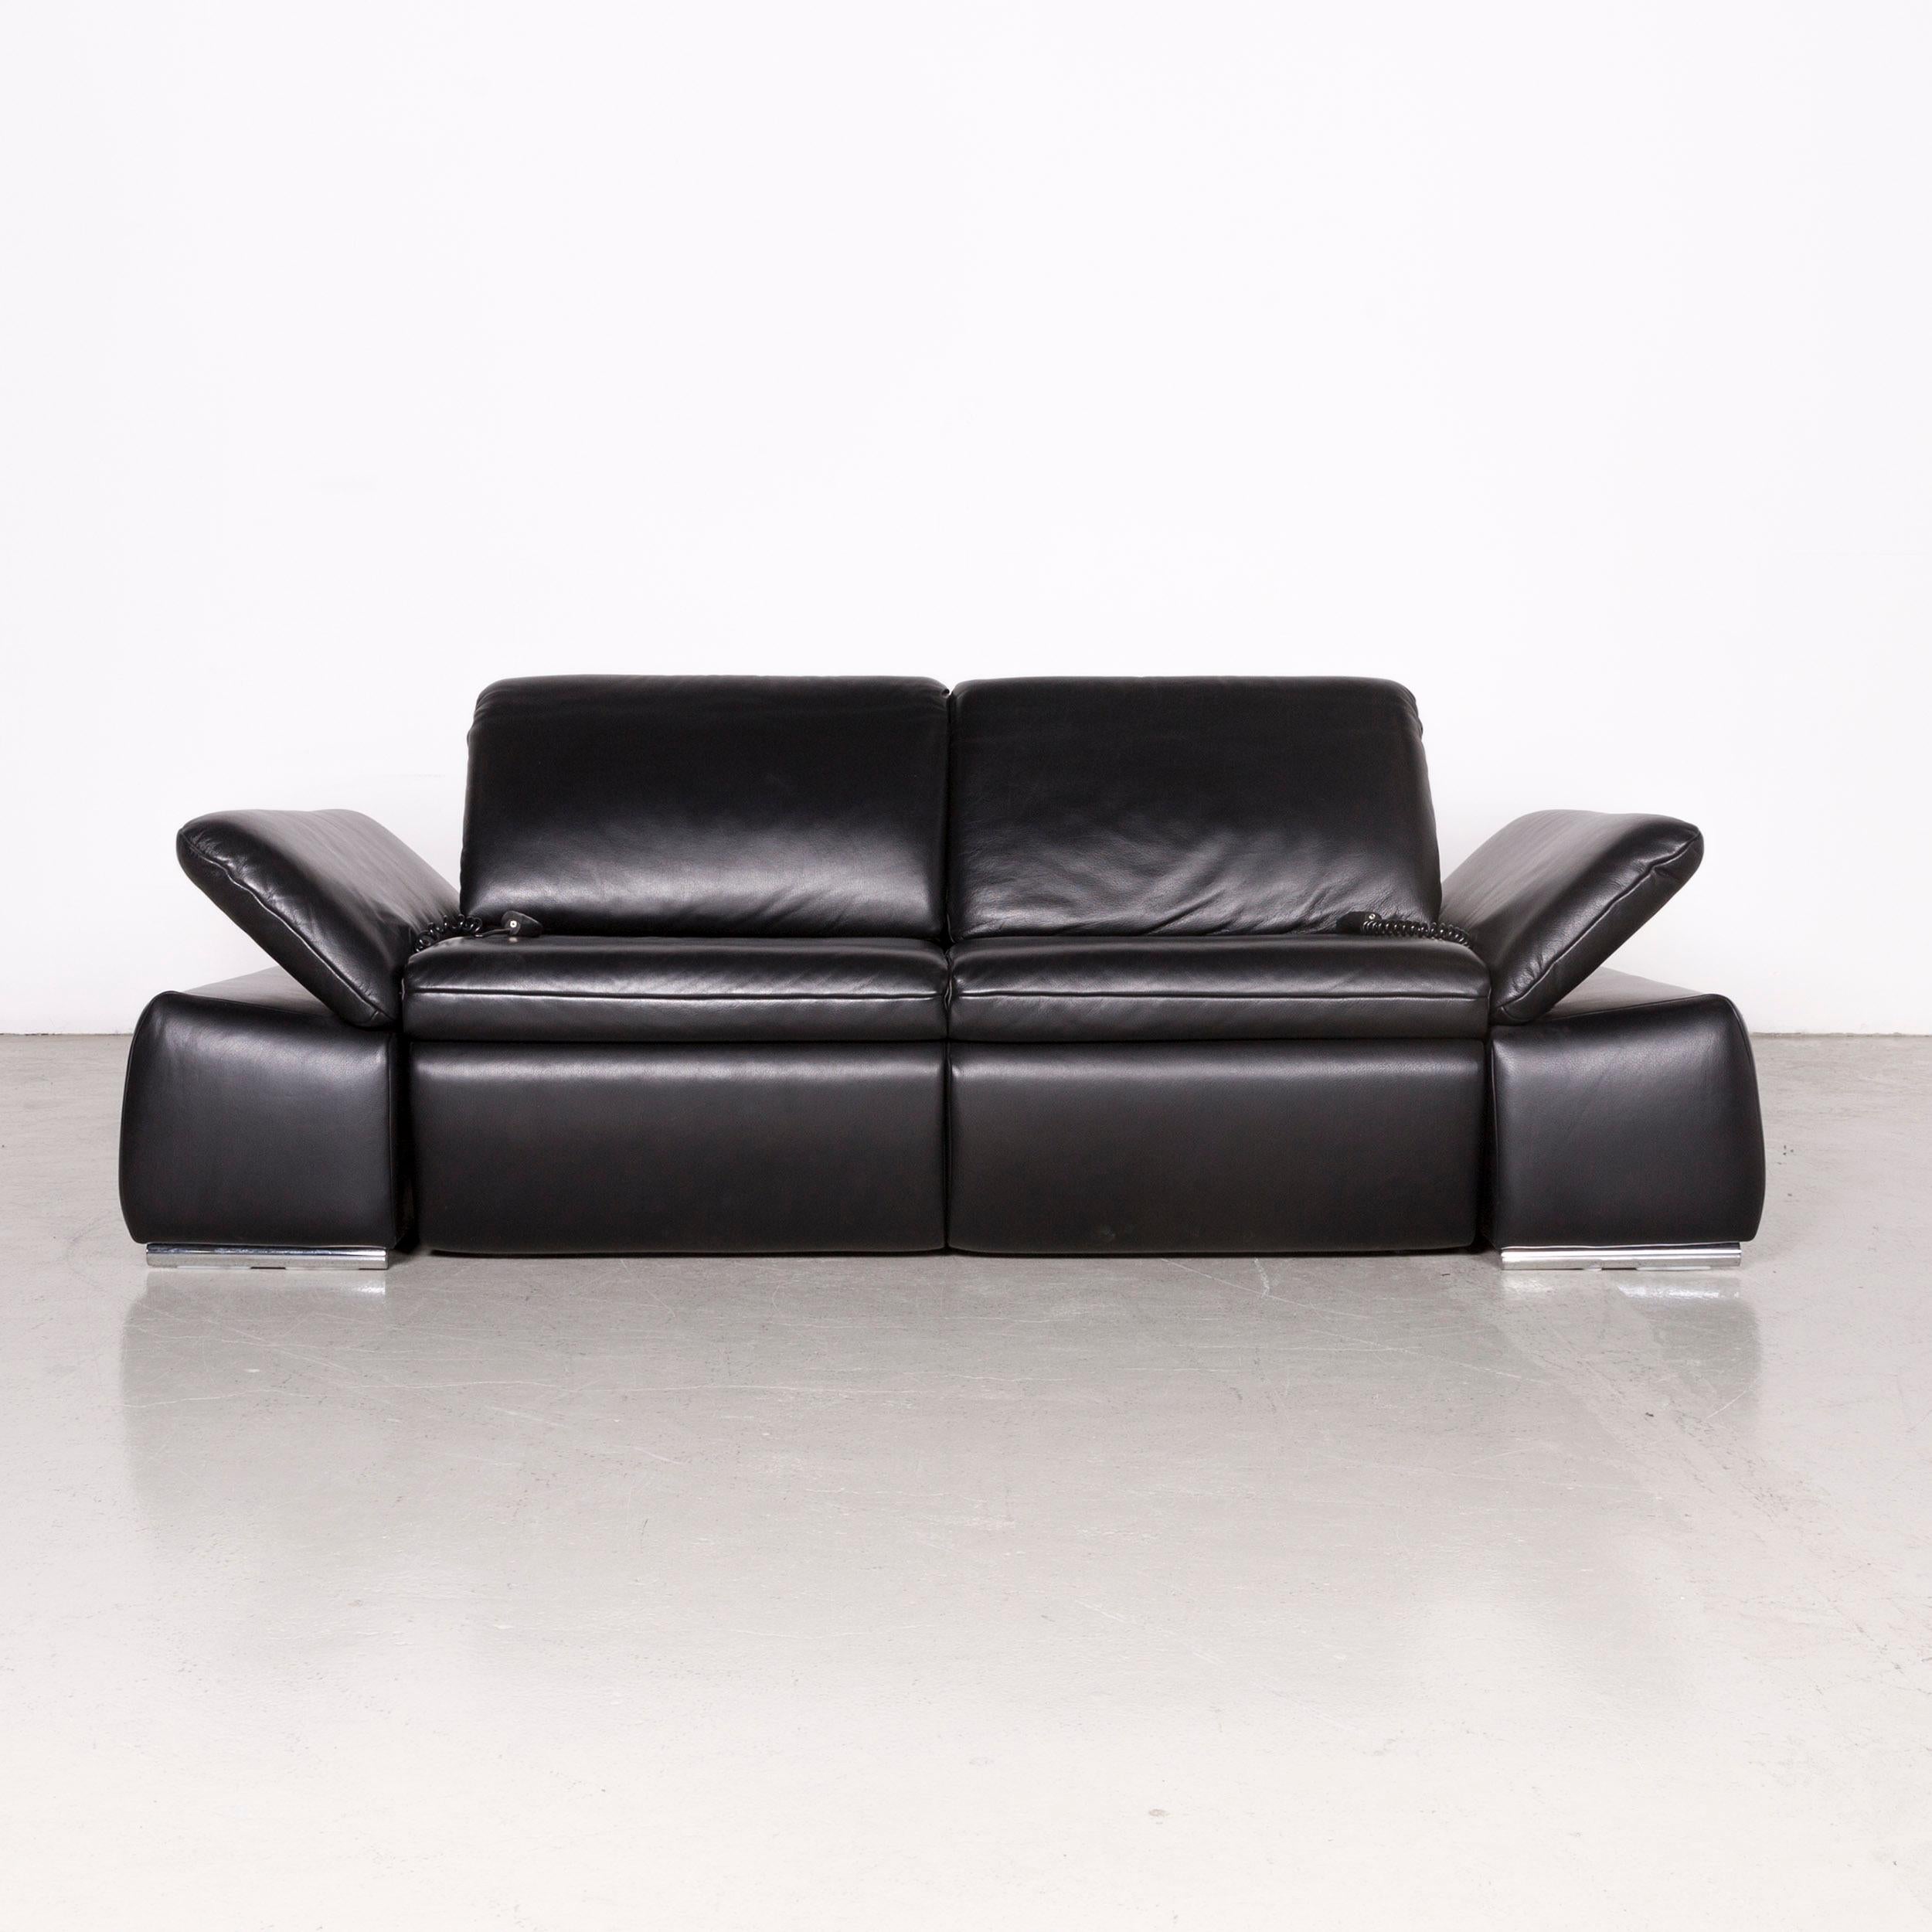 Koinor Evento designer sofa black three-seat leather couch electric function.